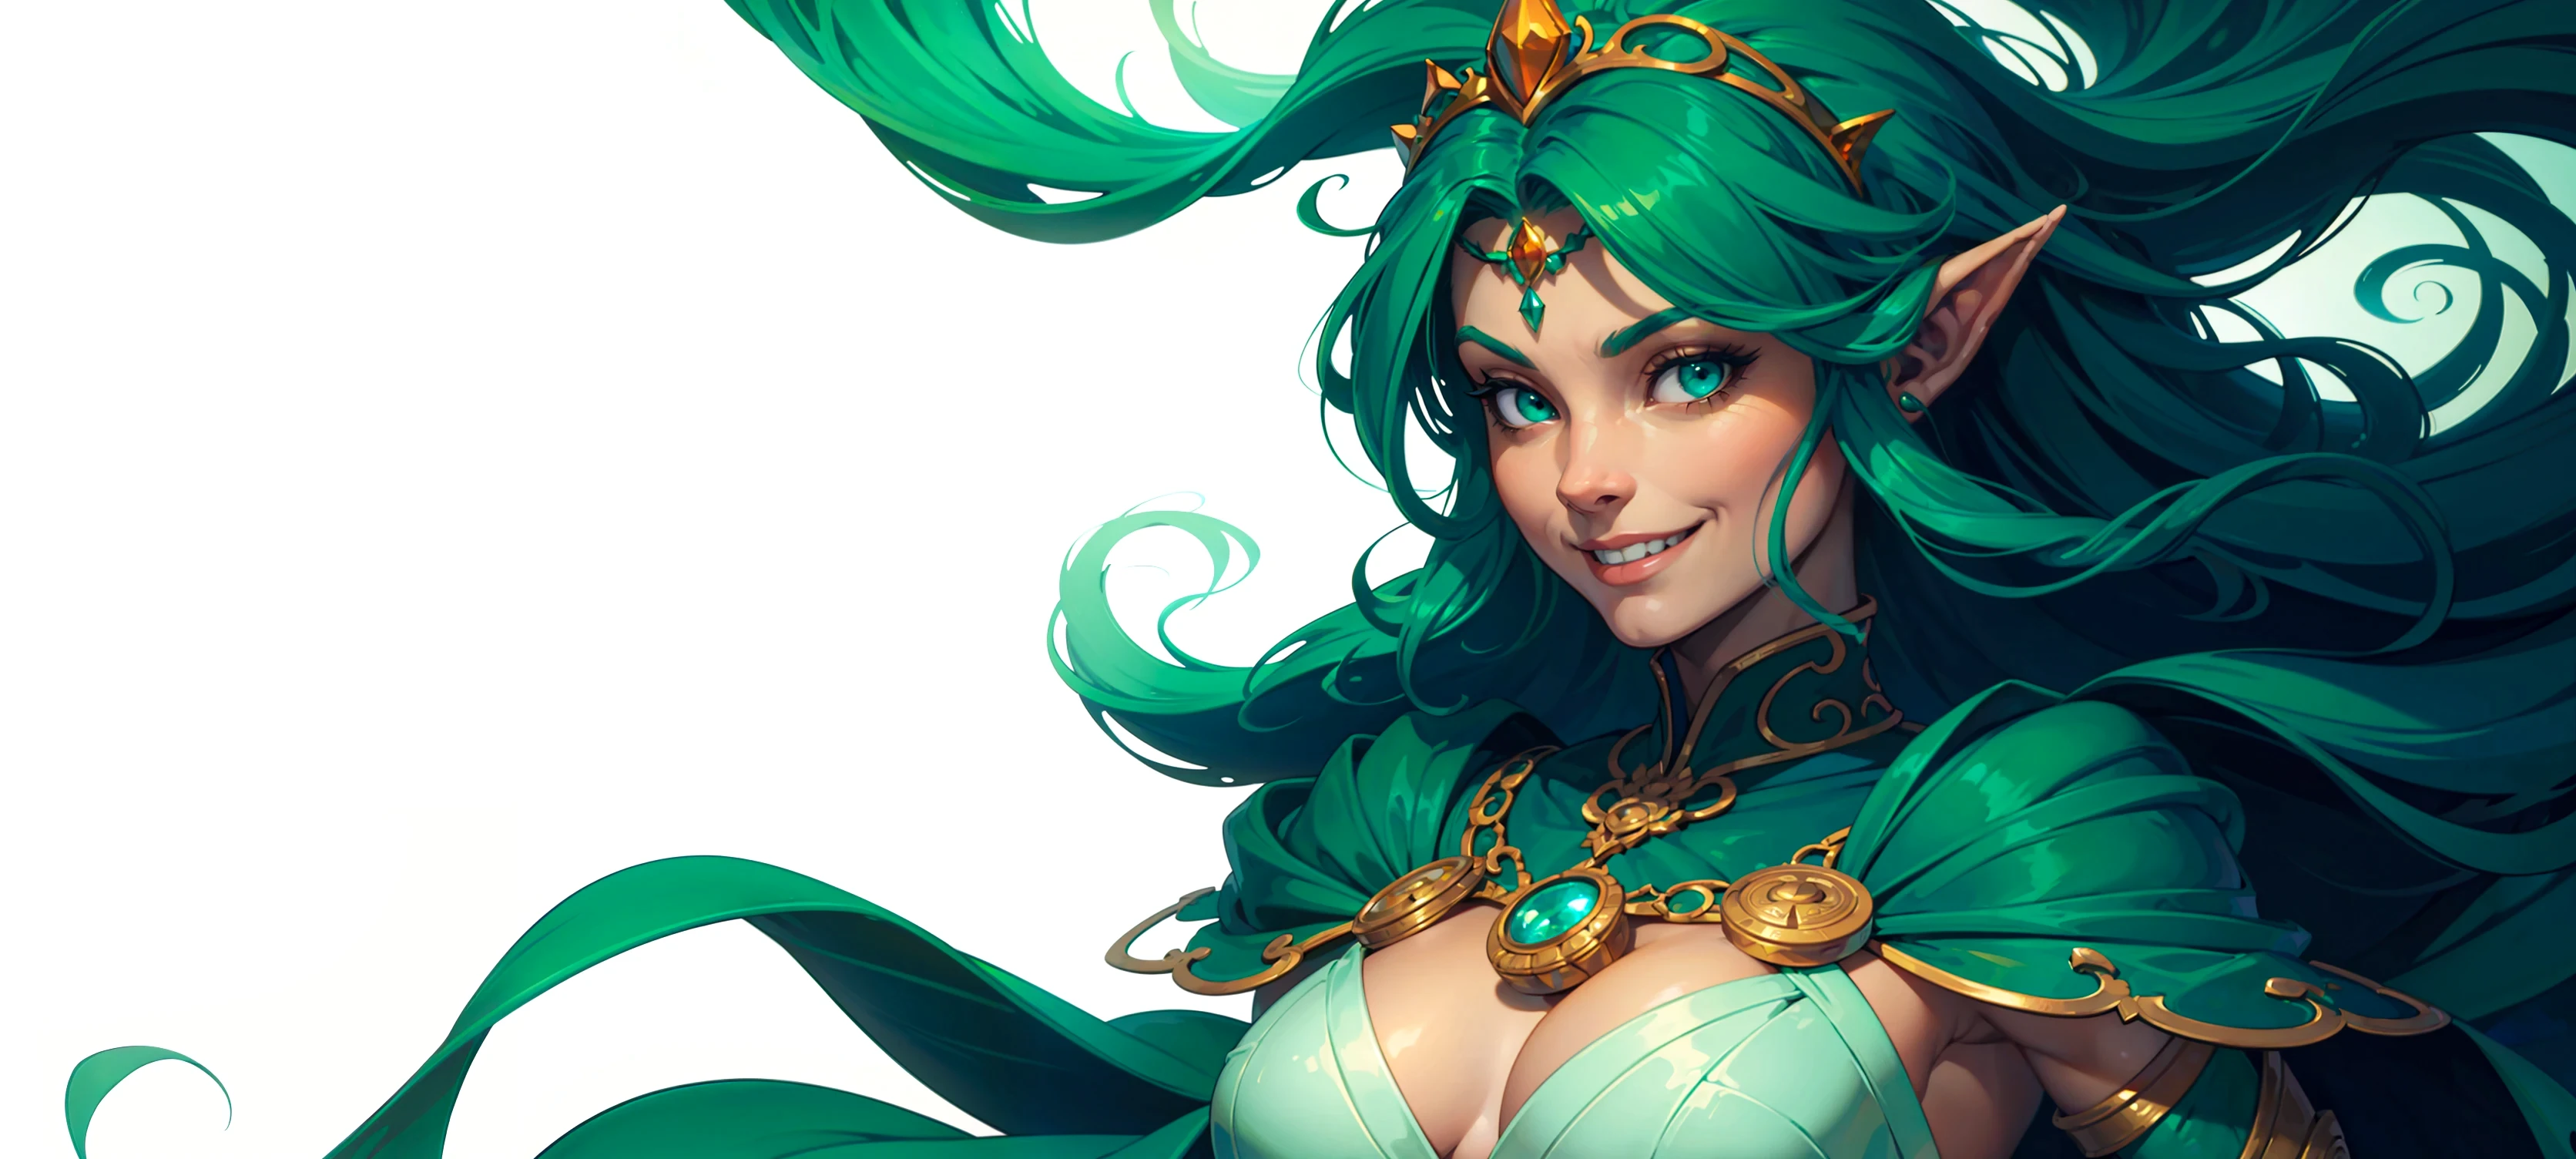 Smiling green elf woman in a hero section illustration with an empty white background